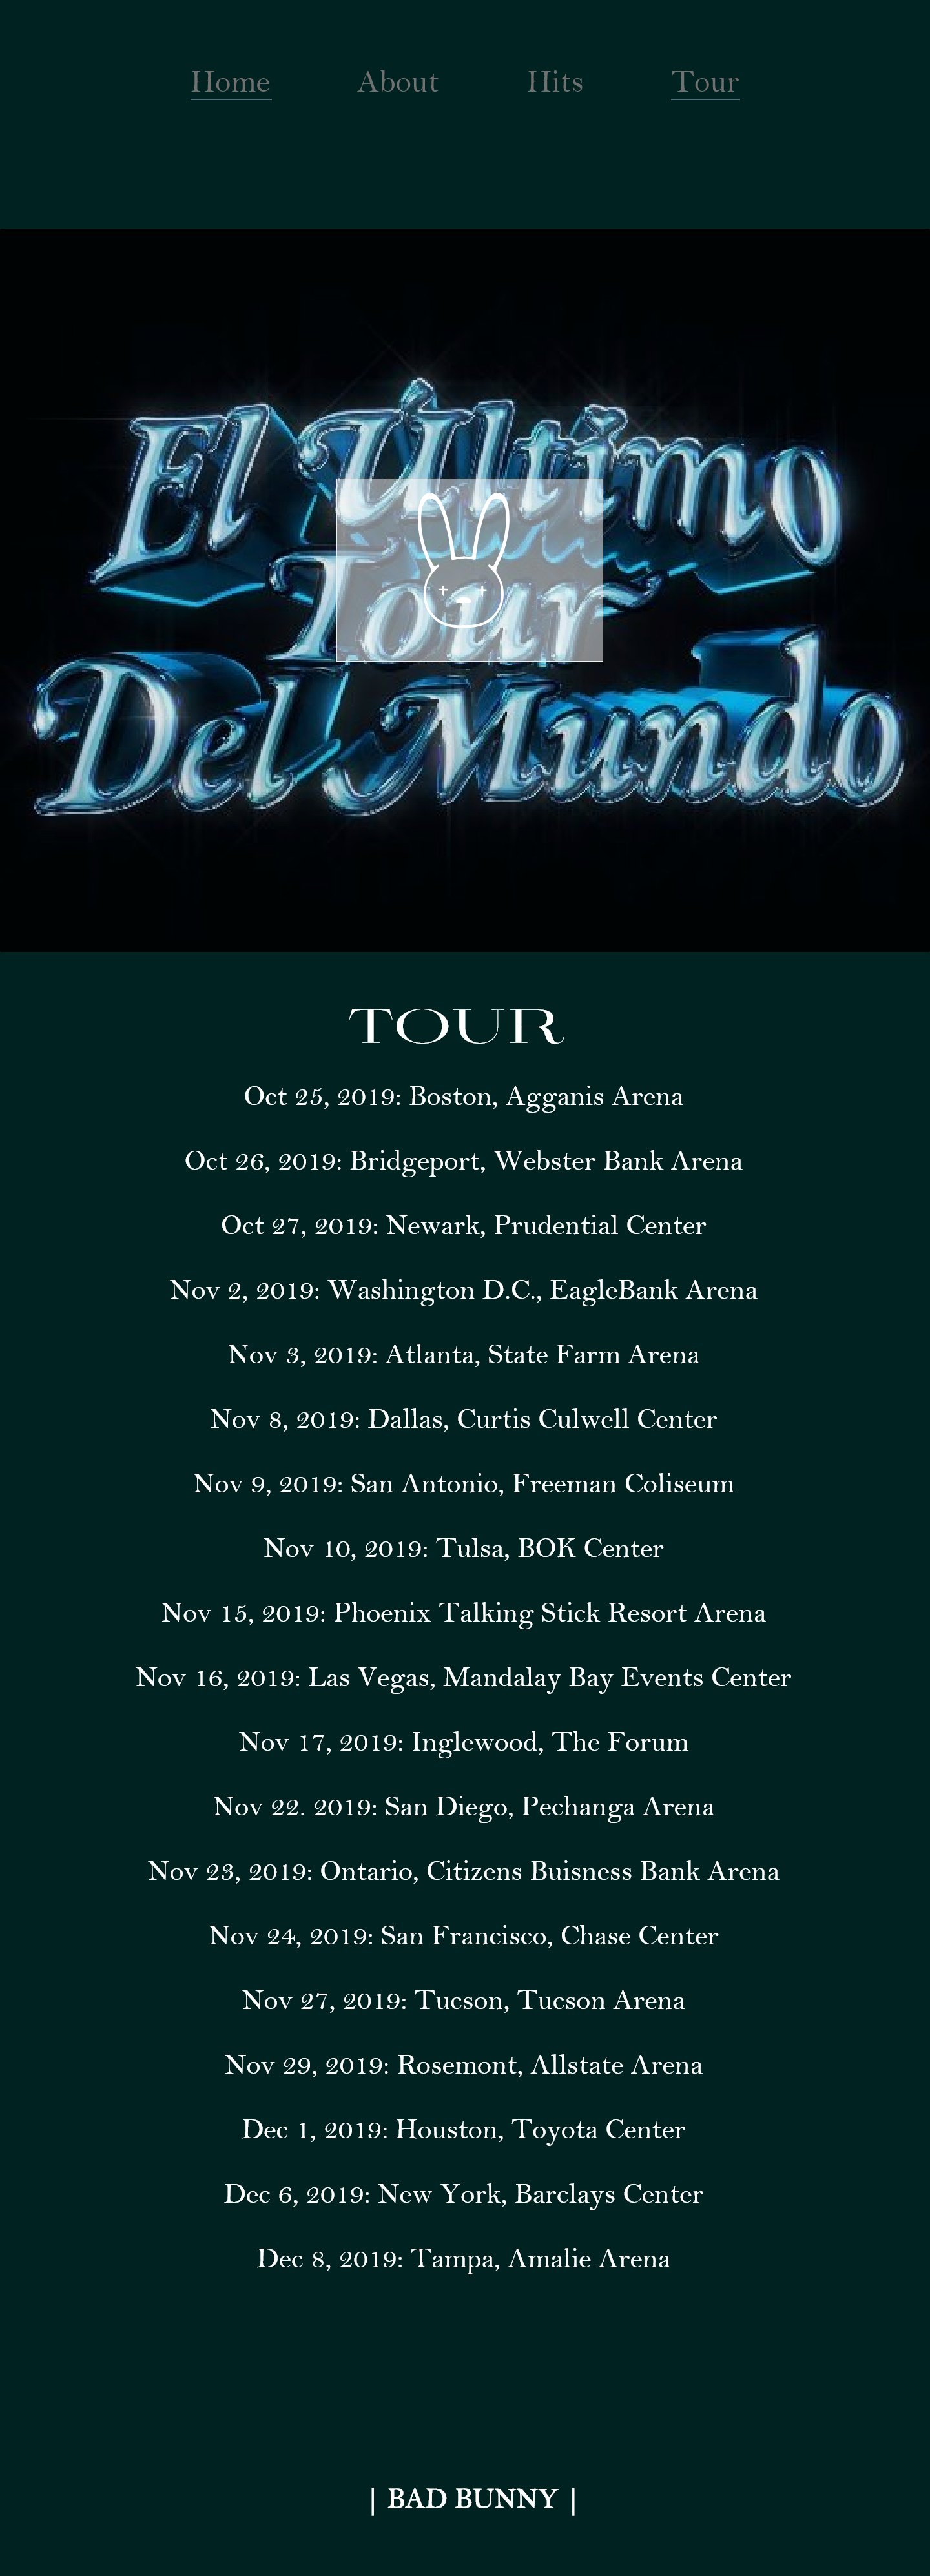 Tour Page for Web